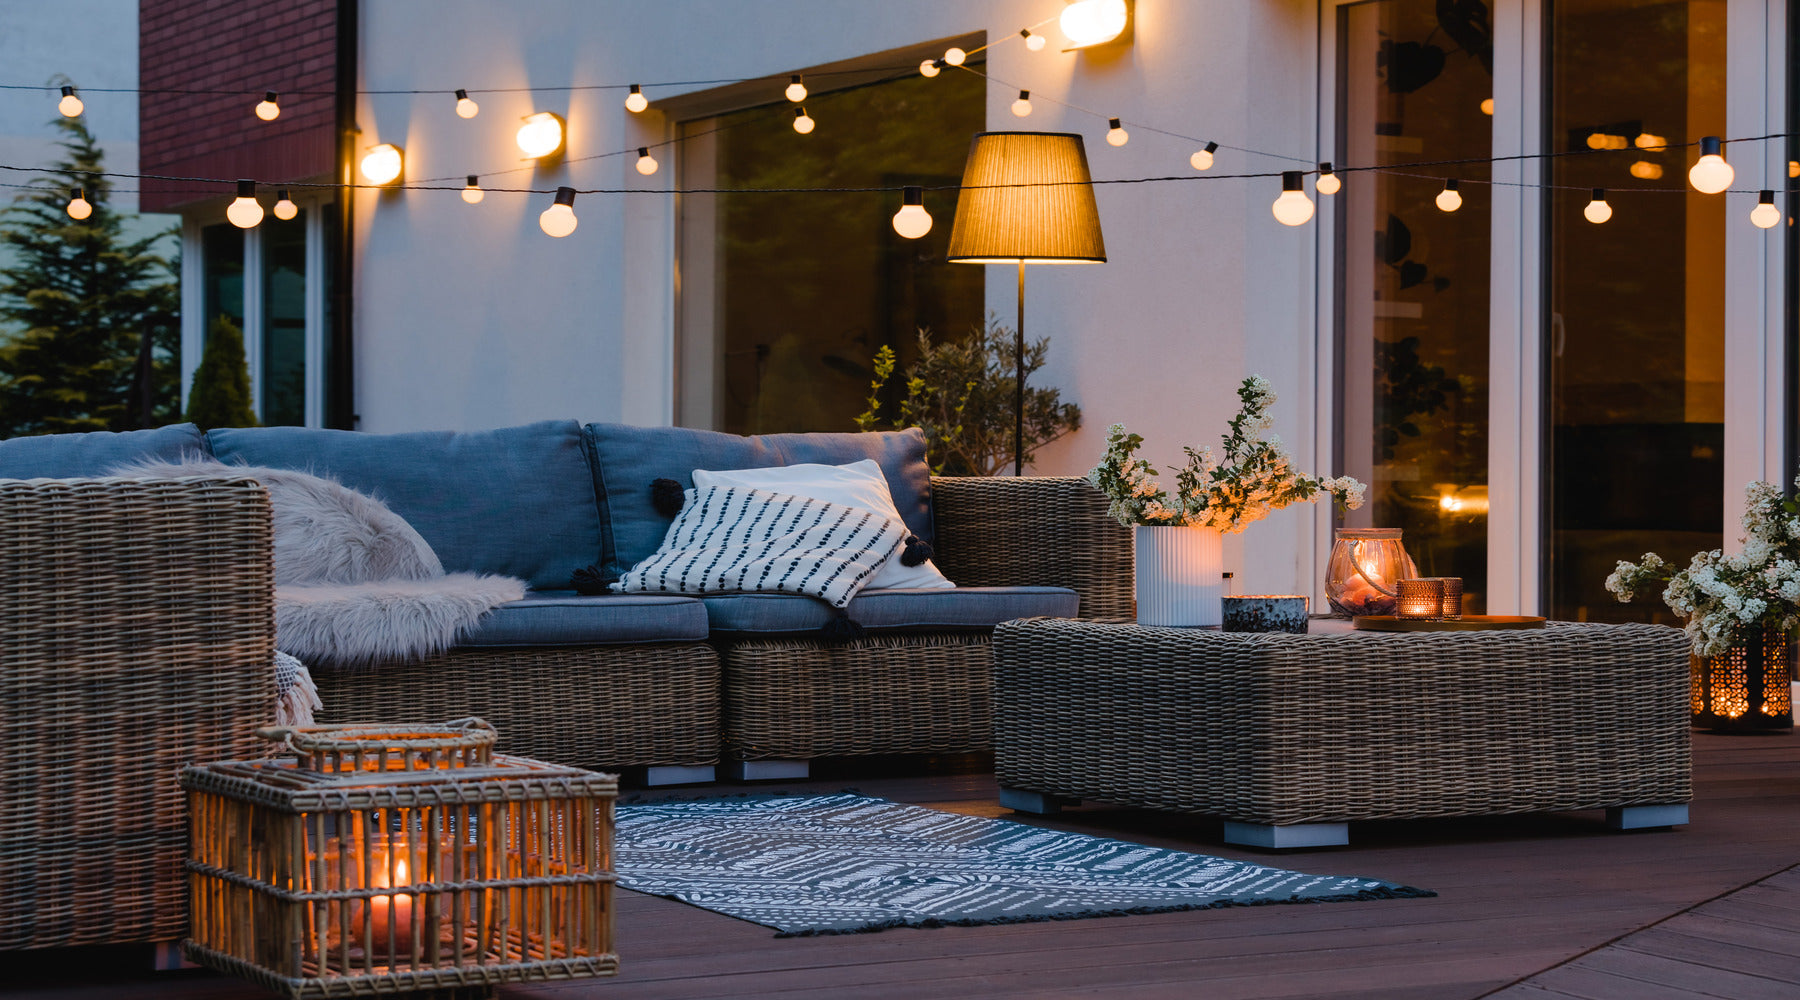 Patio of suburban home with garden being illuminated with outdoor string lights on summer evening